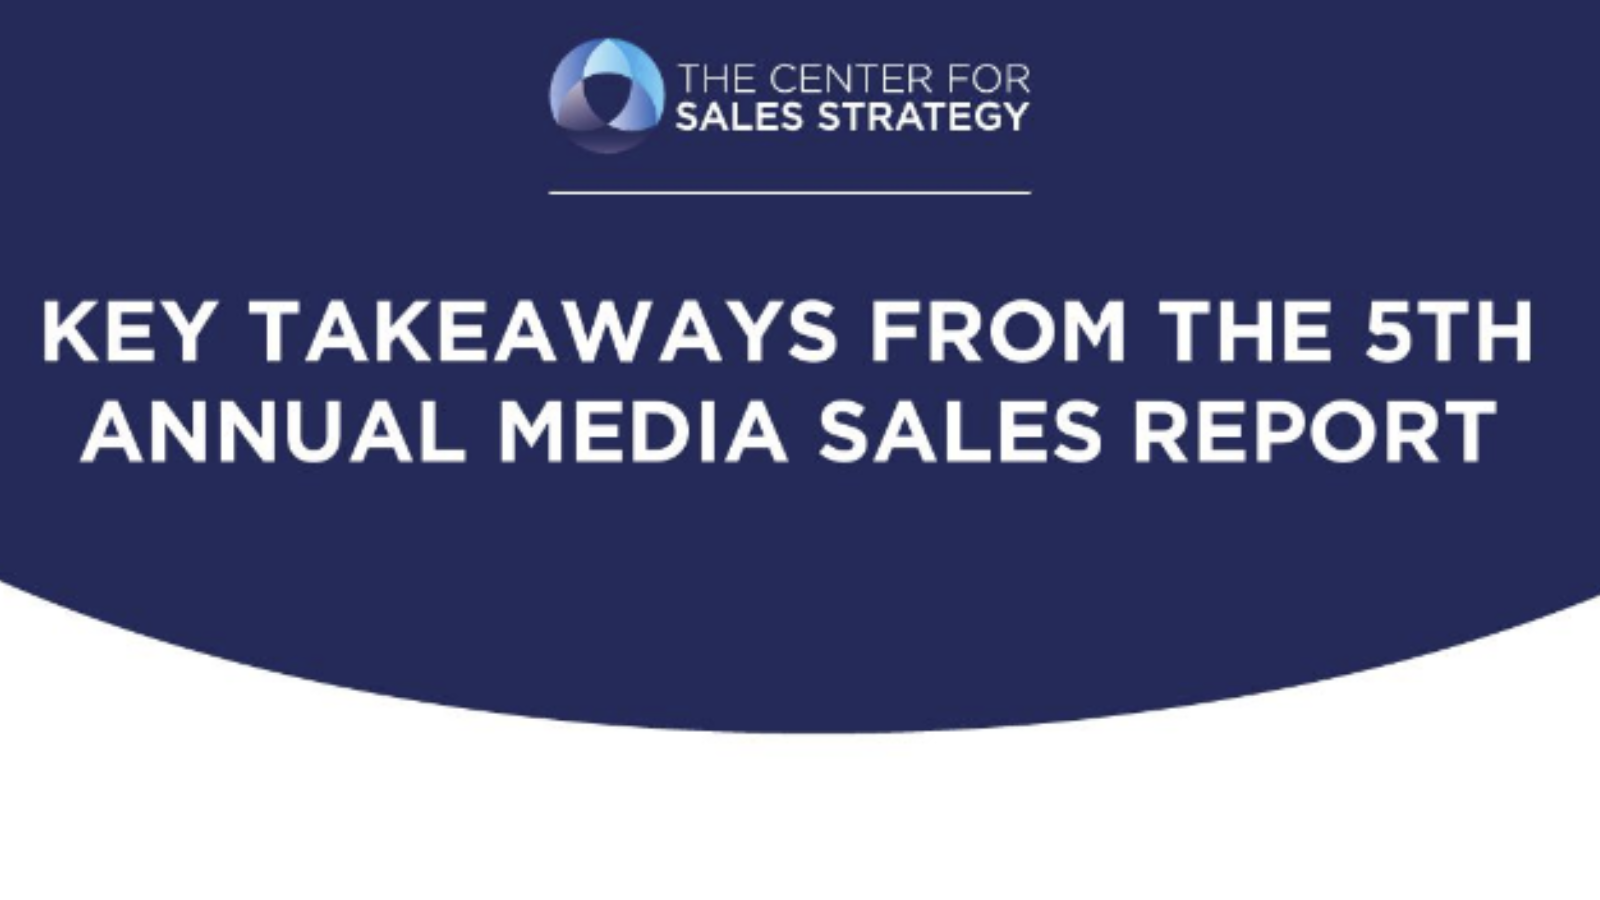 [INFOGRAPHIC] Key Takeaways From The 5th Annual Media Sales Report